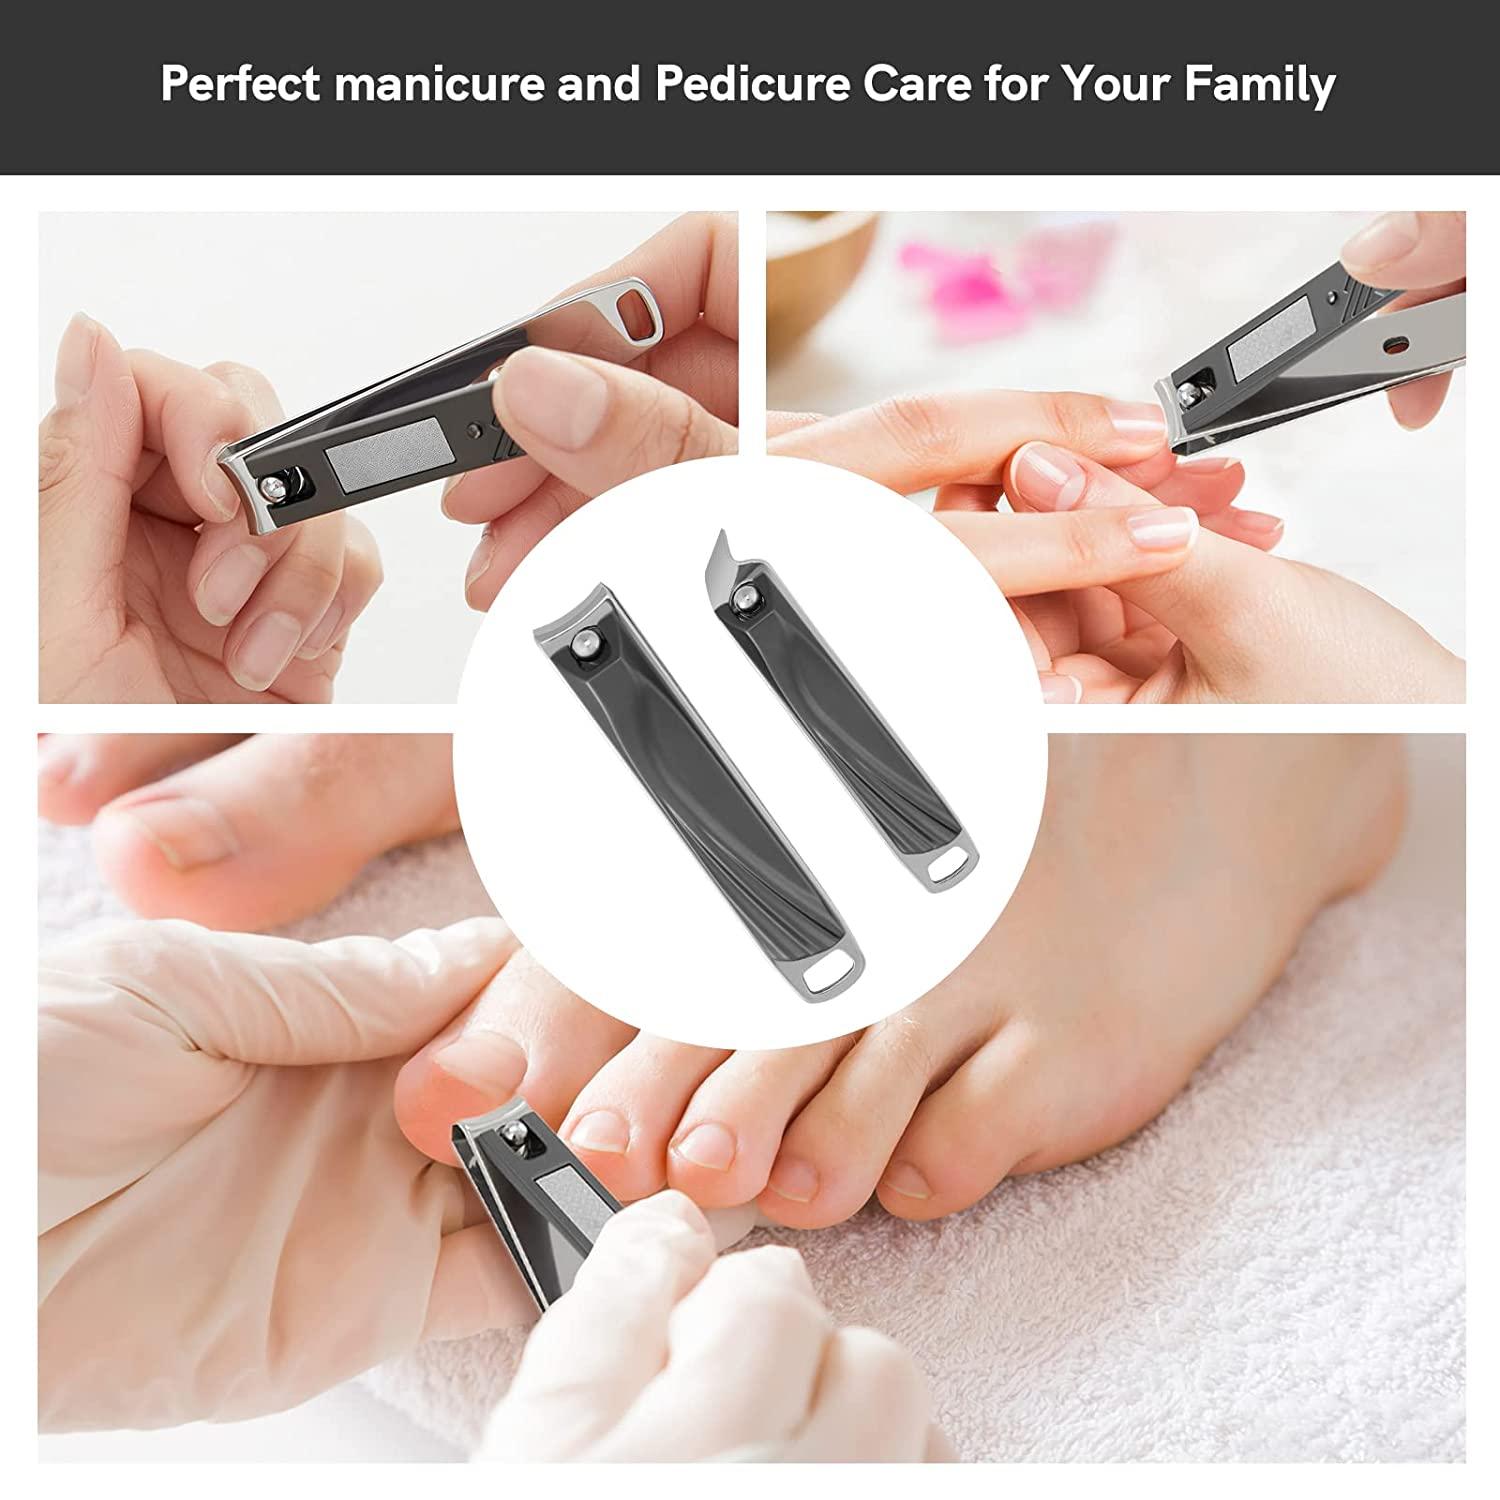 Black Nail Clippers Set, Ultra Sharp Sturdy Stainless Steel Fingernail And  Toenail Clippers With Curved Blades For Ingrown Nails, Pcs Black |  Precision Toenail Clippers For Thick Or Ingrown Toenails -paronychia Thick